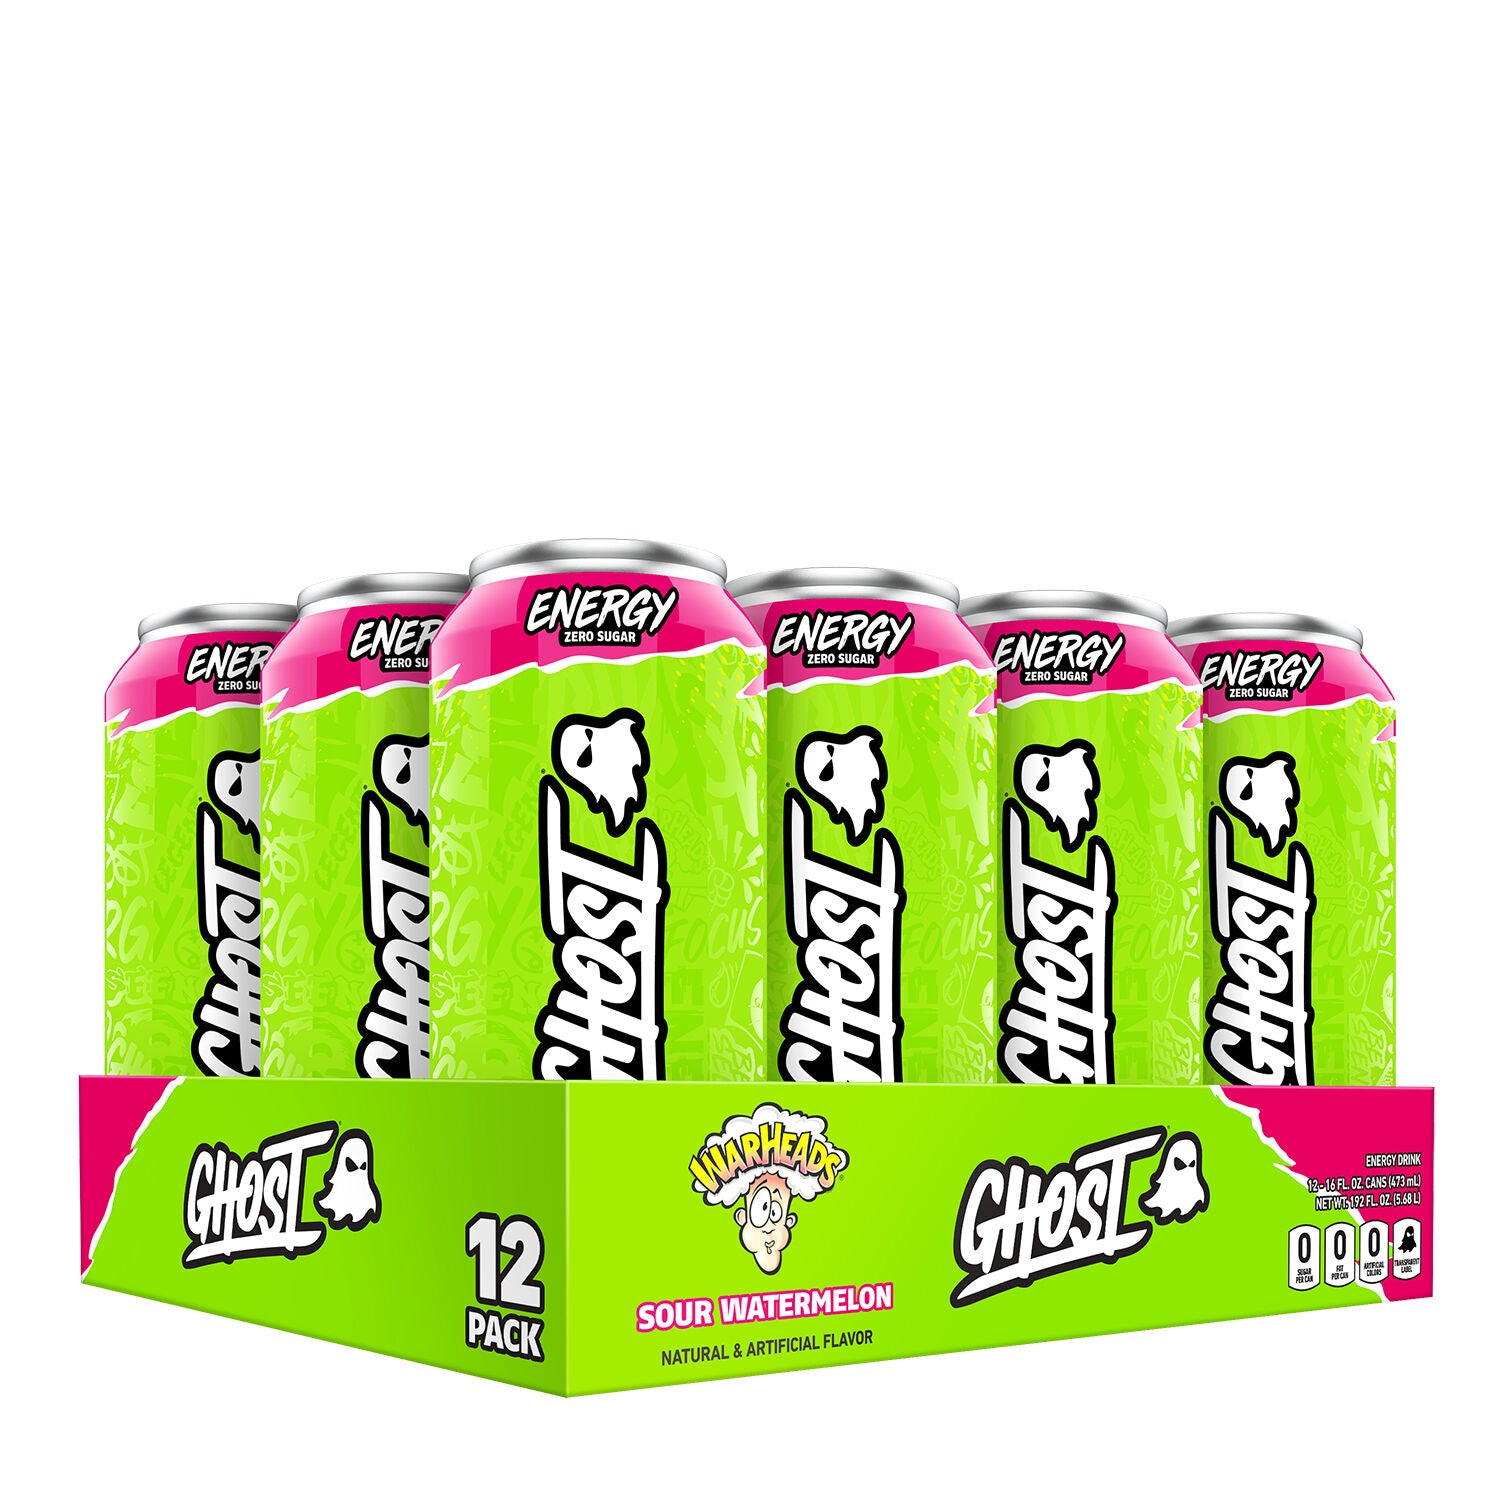 GHOST Energy Drink (1 case of 12 cans) Protein Snacks Sour Watermelon Warheads GHOST ghost-energy-drink-1-case-of-12-cans